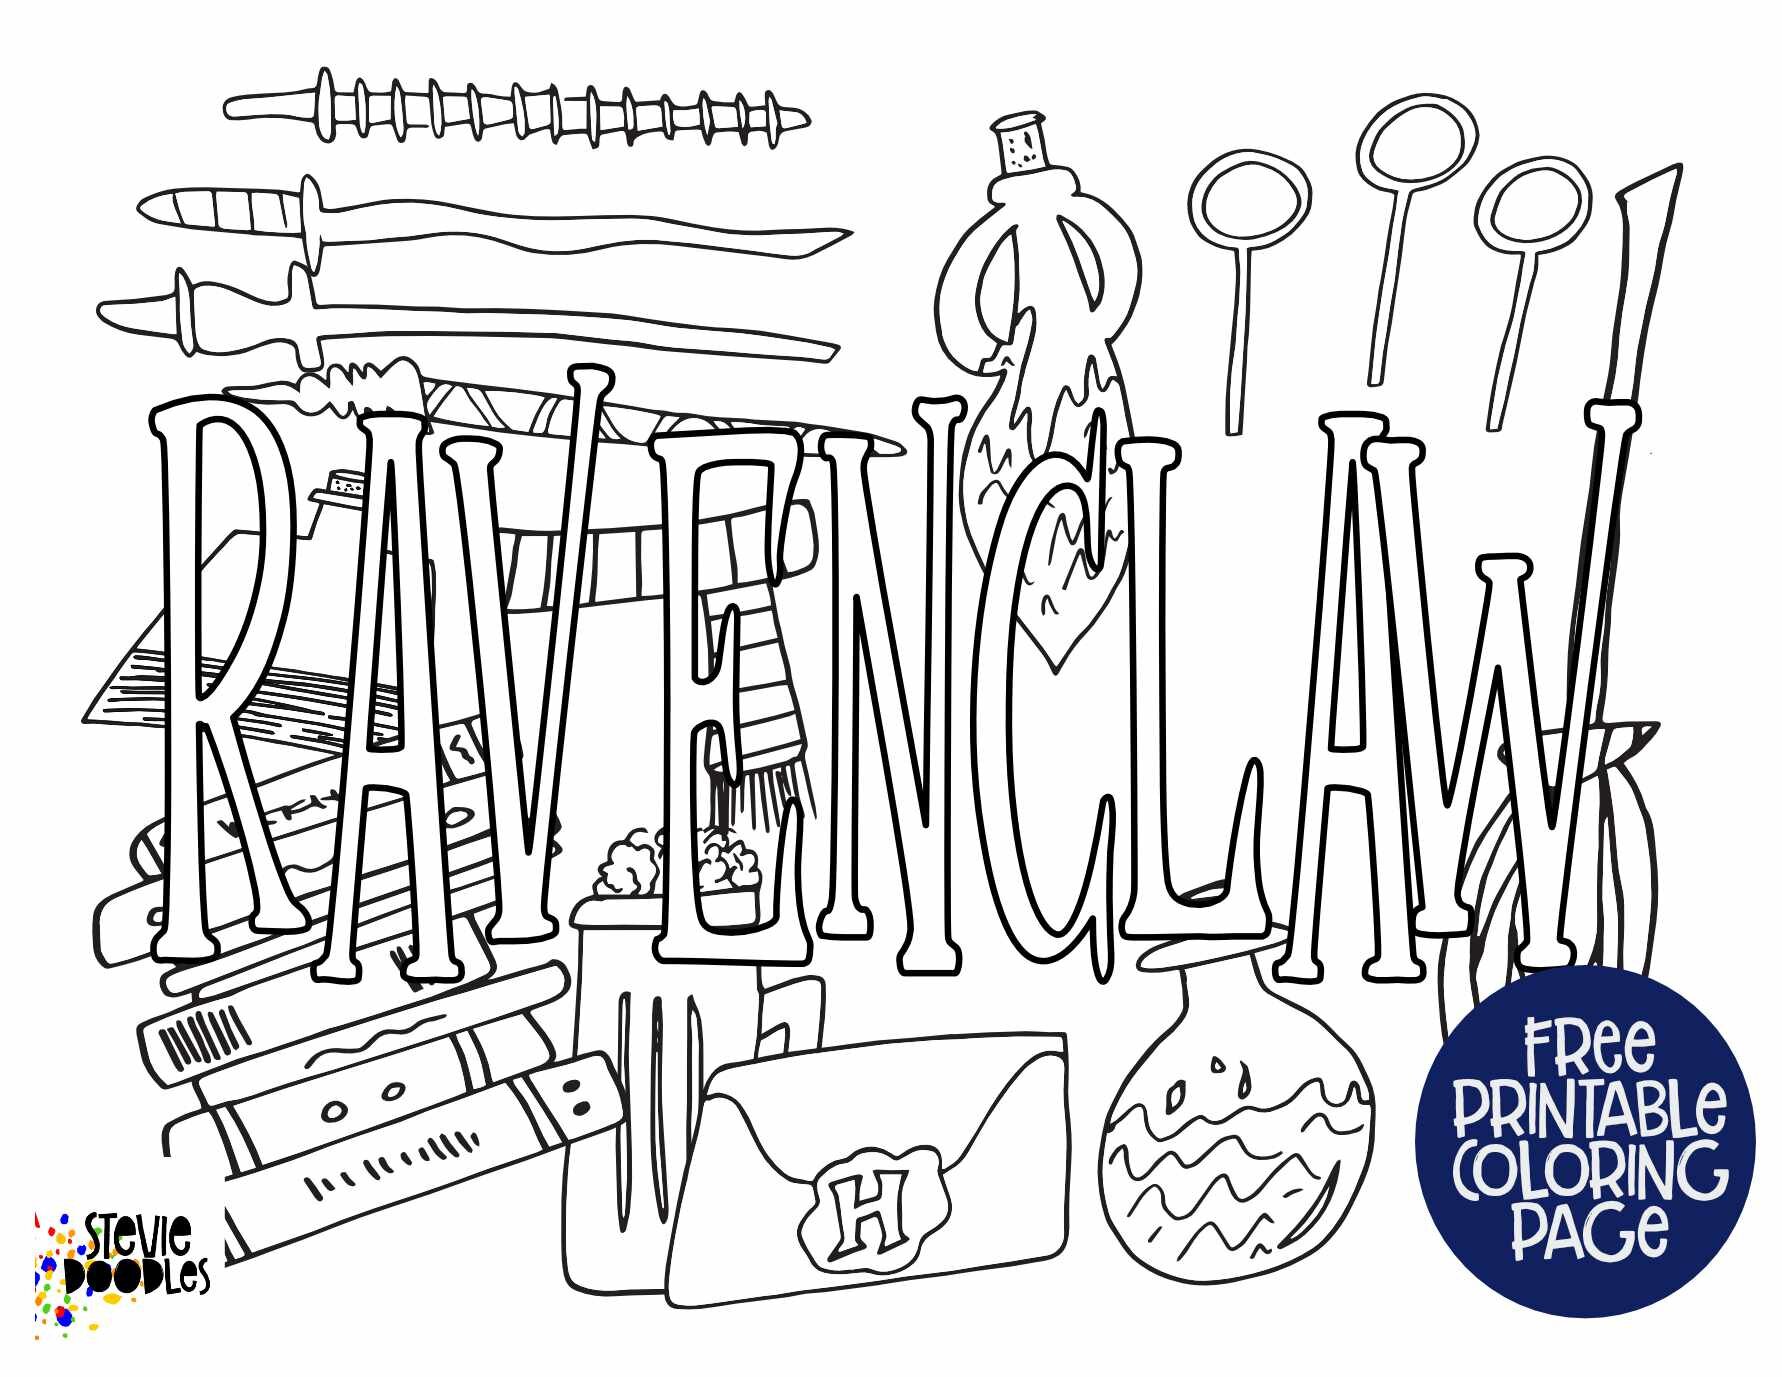 Free Ravenclaw Coloring Pages — Stevie Doodles